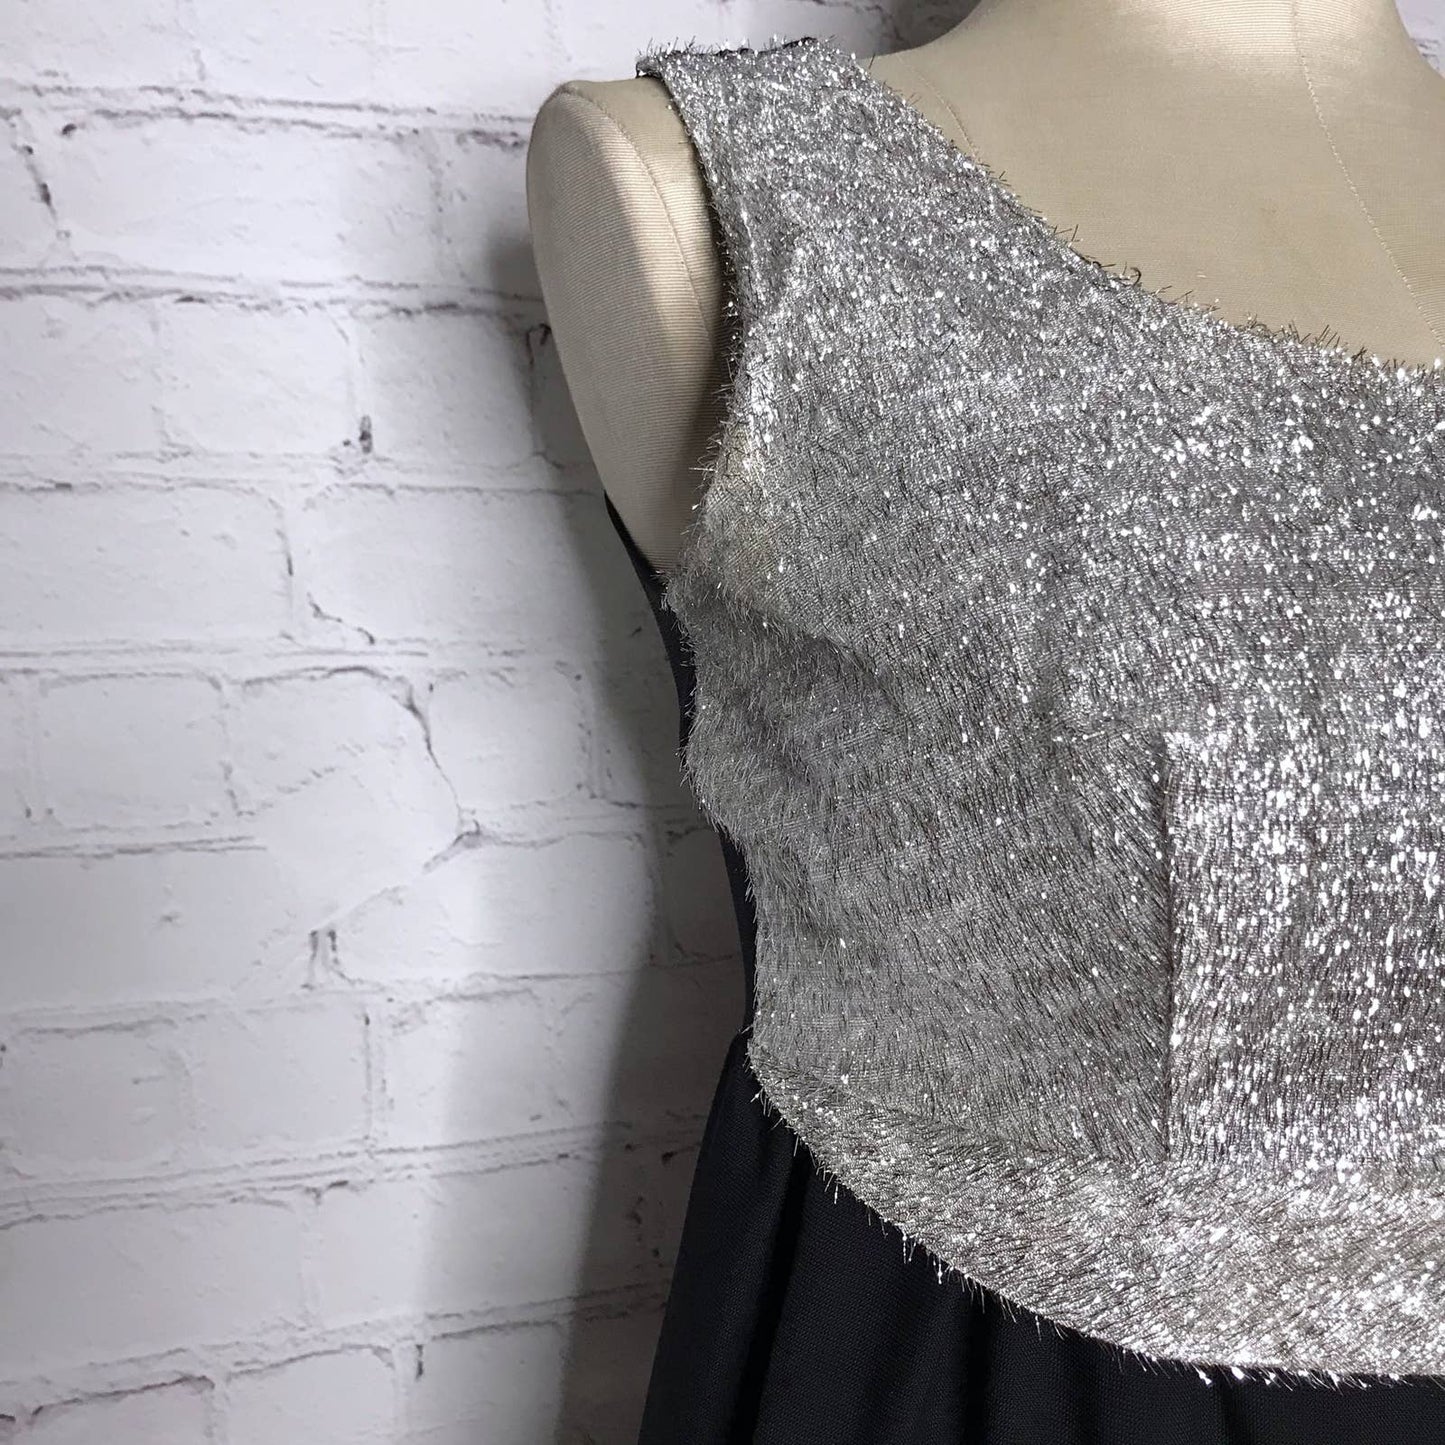 60s Vintage Eyelash Tinsel Party Dress Black and Silver Handmade Size S M